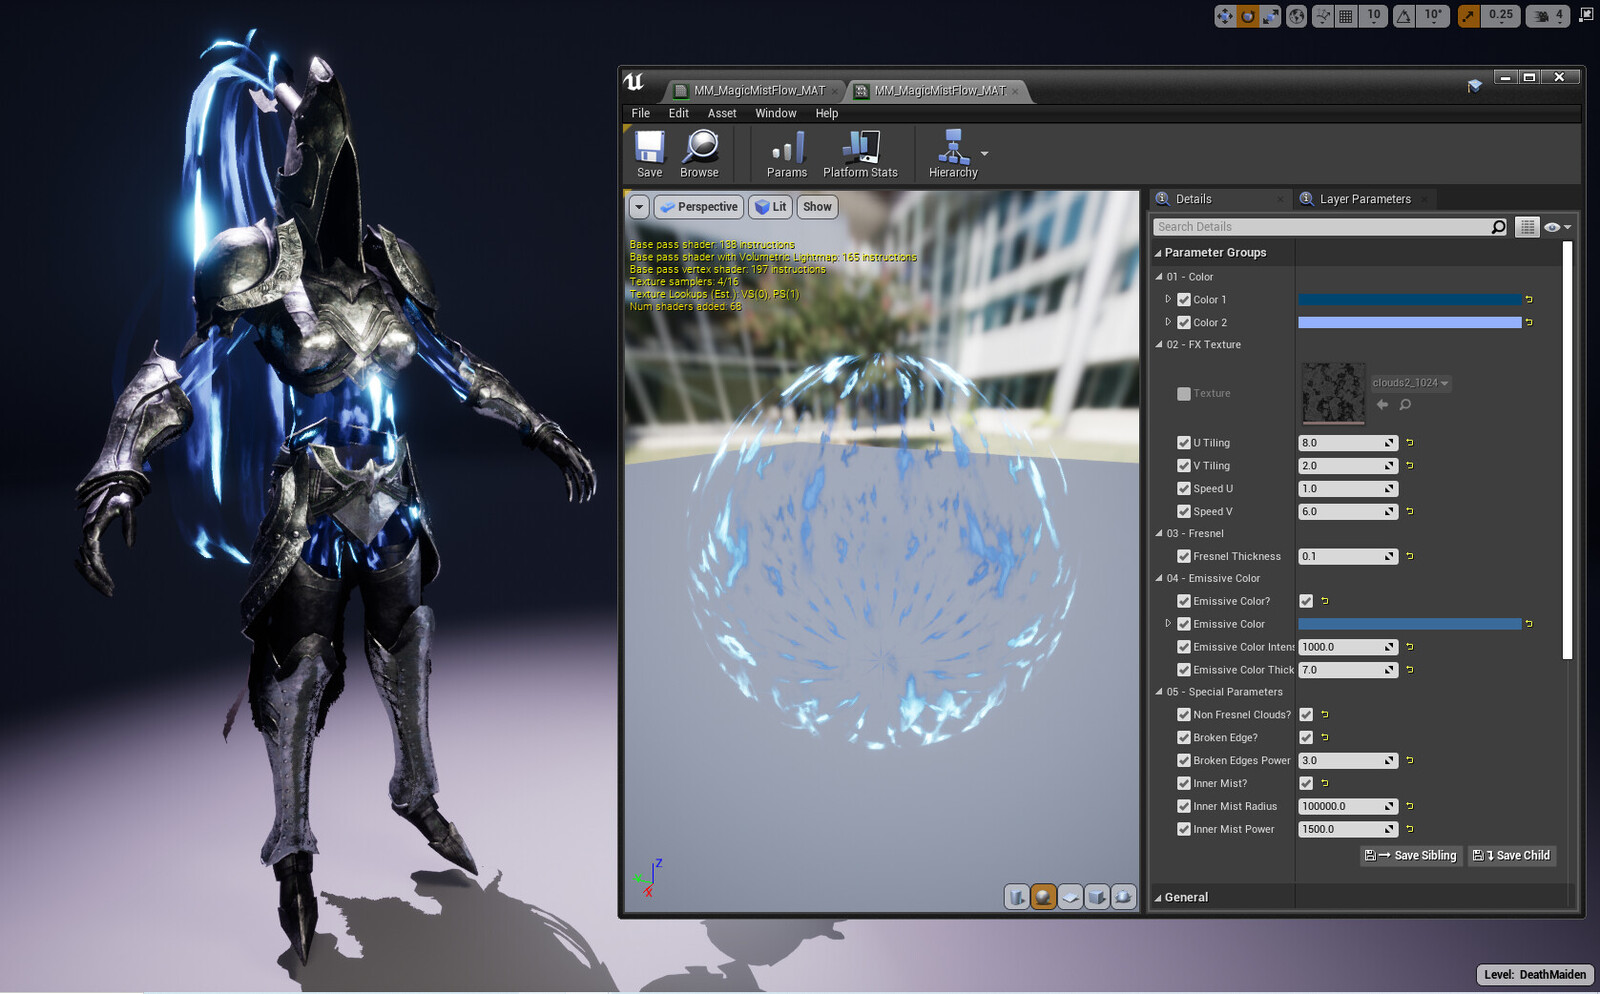 Body energy mist material in Unreal 4.